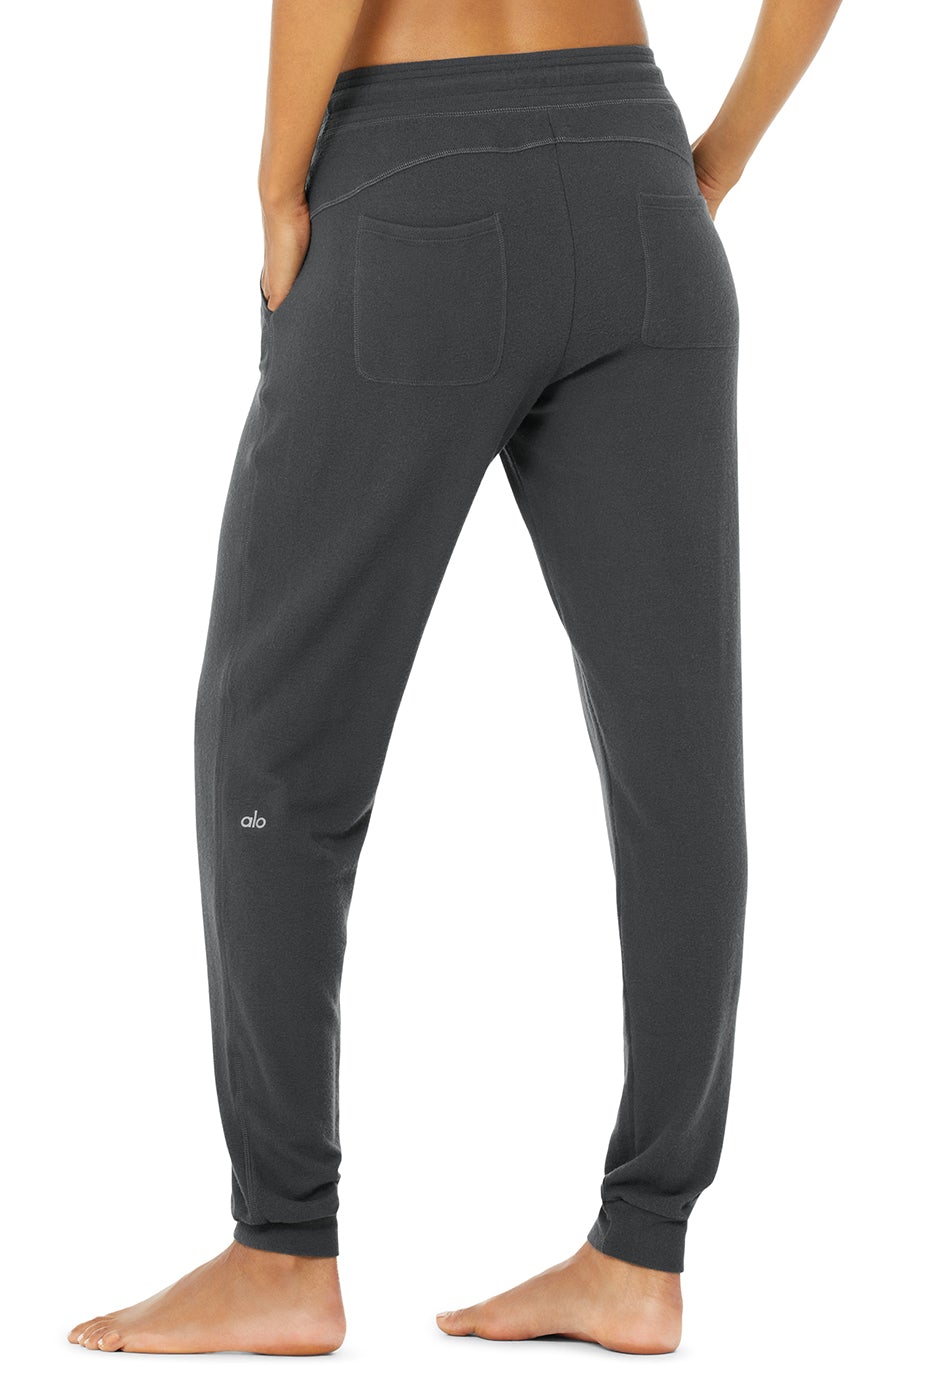 ALO Yoga Women's Soho Jogger Sweatpant in Anthracite (Charcoal) Size XSMALL